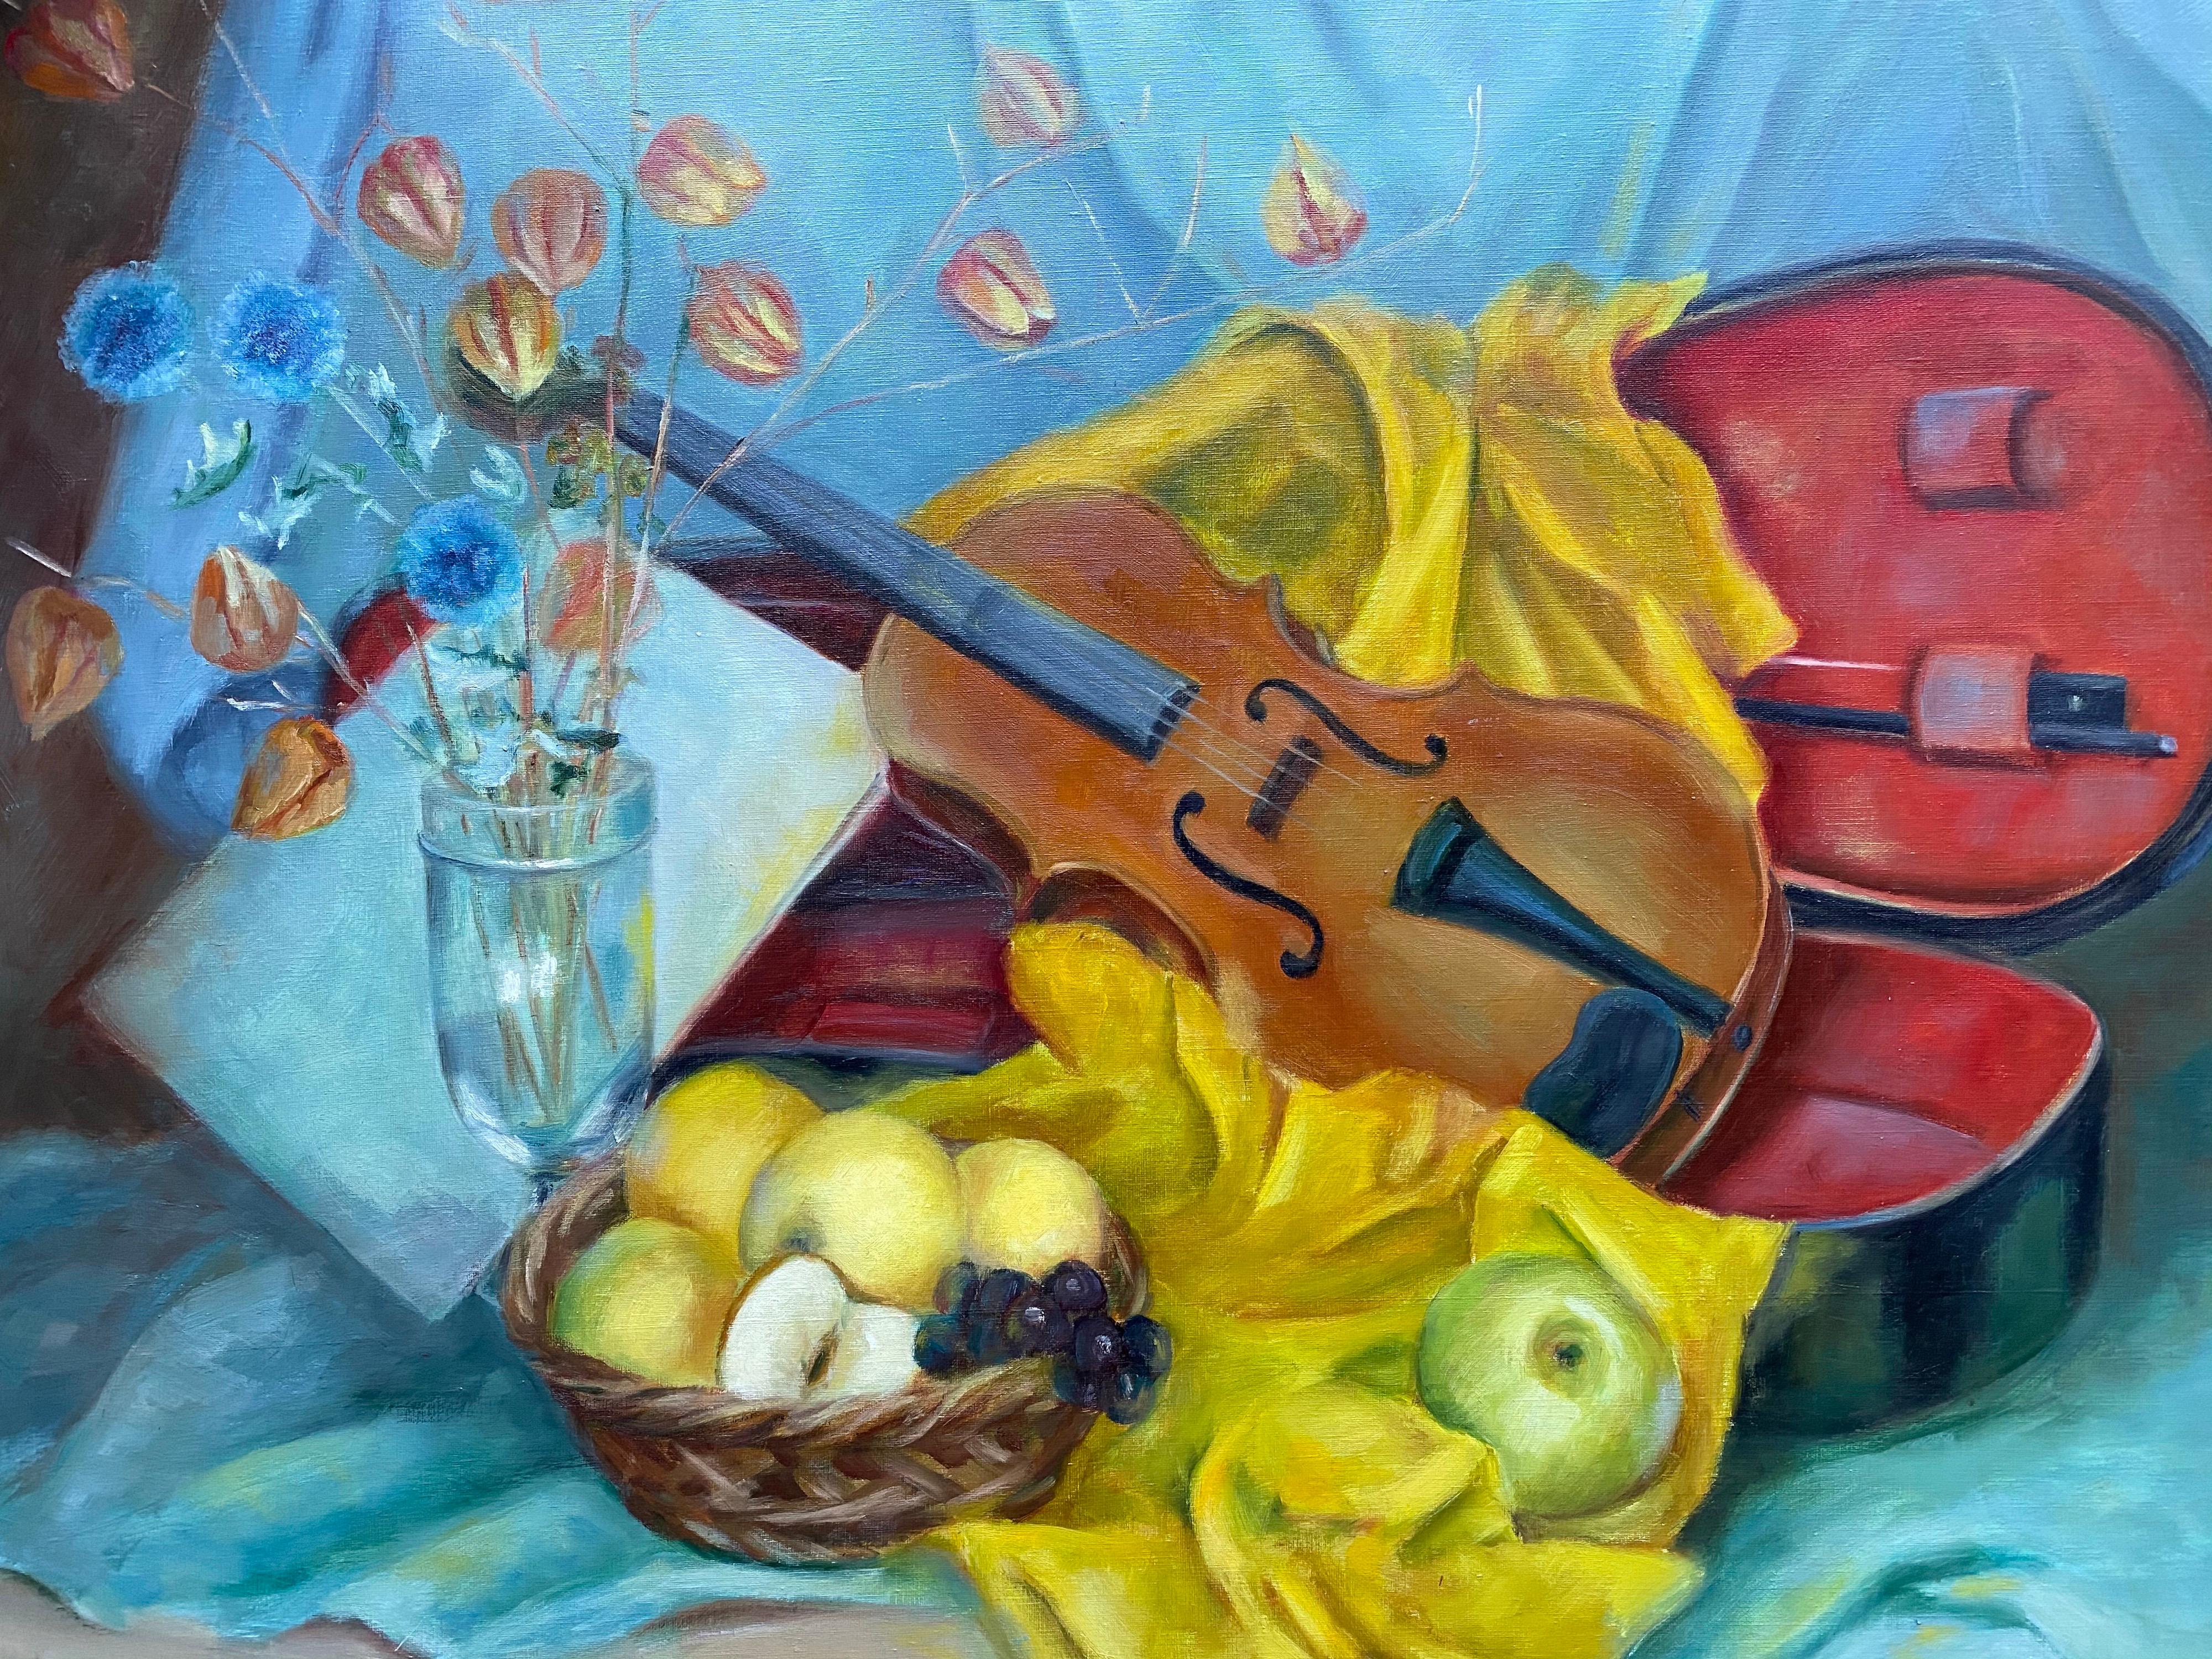 Large 20th Century French Impressionist Oil - Colorful Still Life Violin - Painting by Yvette Bossiere